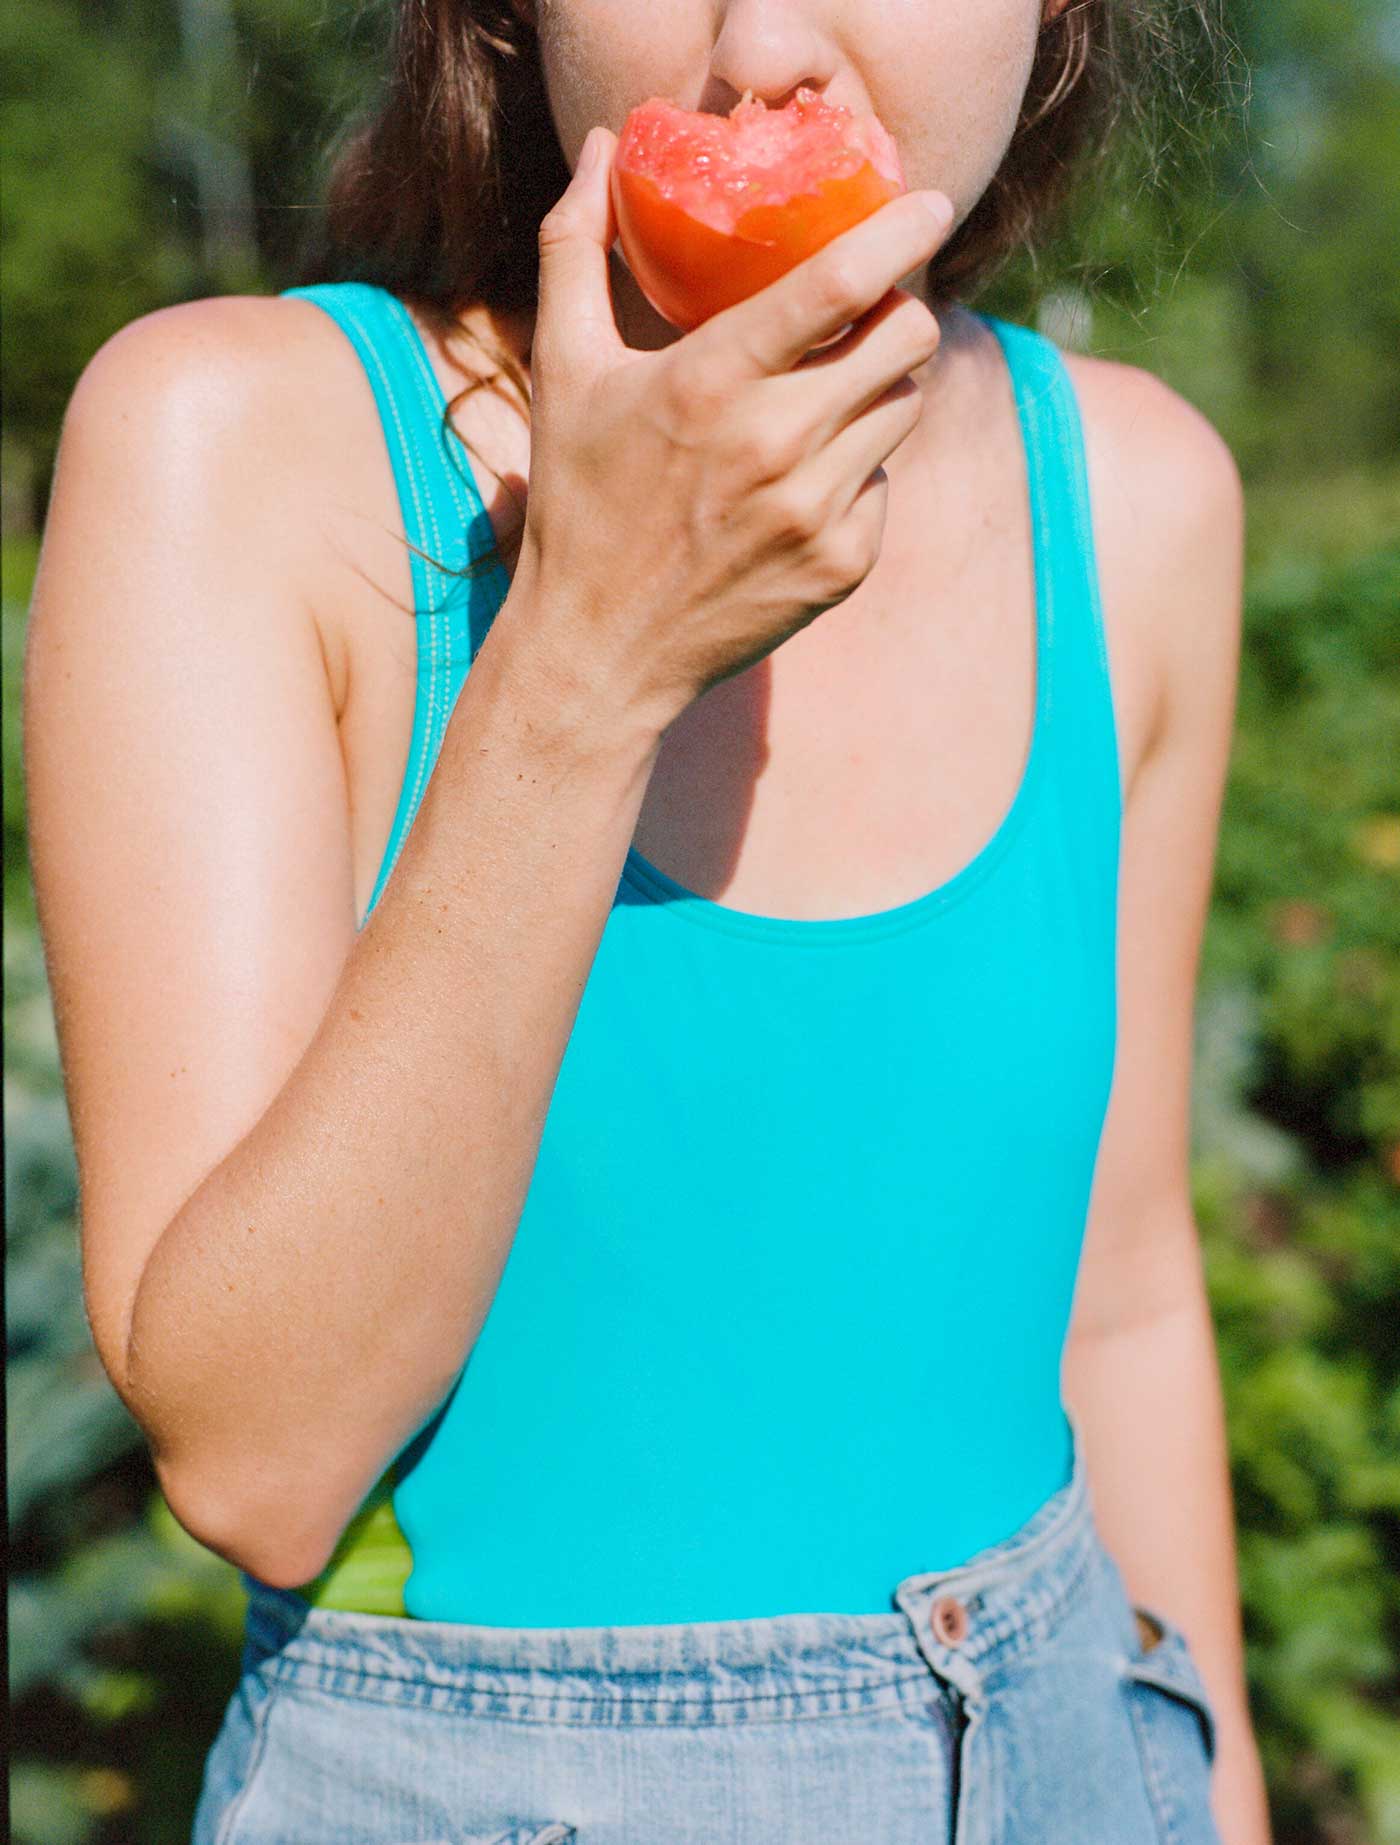 A person in a swimsuit and shorts eats a piece of fruit.